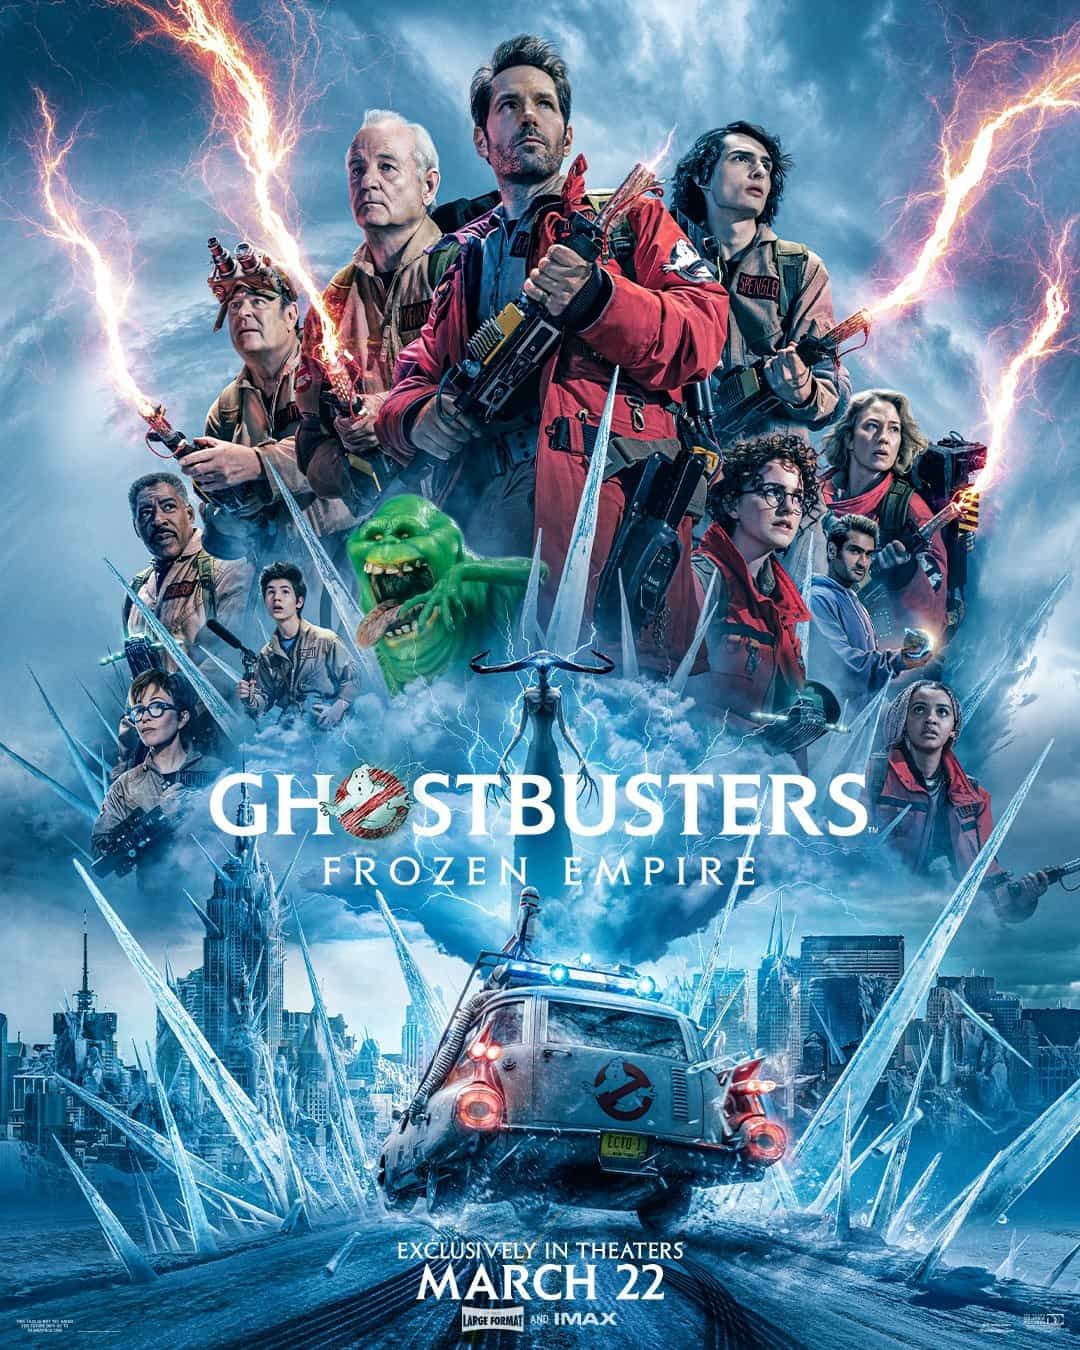 Check out the new trailer for upcoming movie Ghostbusters: Frozen Empire which stars Mckenna Grace and Carrie Coon - movie UK release date 22nd March 2024 #ghostbustersfrozenempire